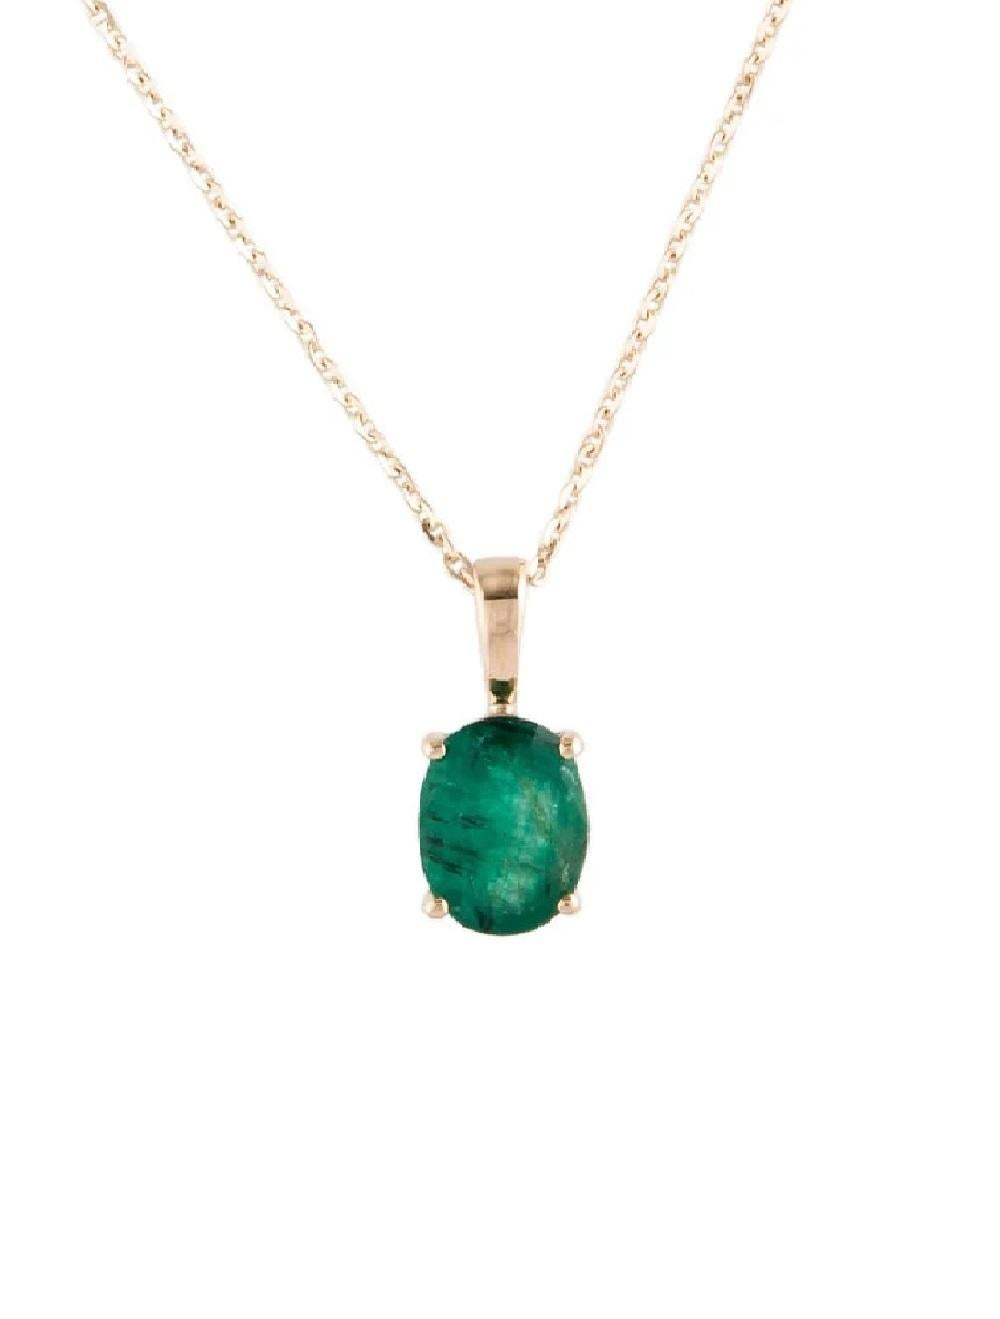 Vintage 14K Emerald Pendant Necklace - Timeless Elegance & Luxury Jewelry In New Condition For Sale In Holtsville, NY